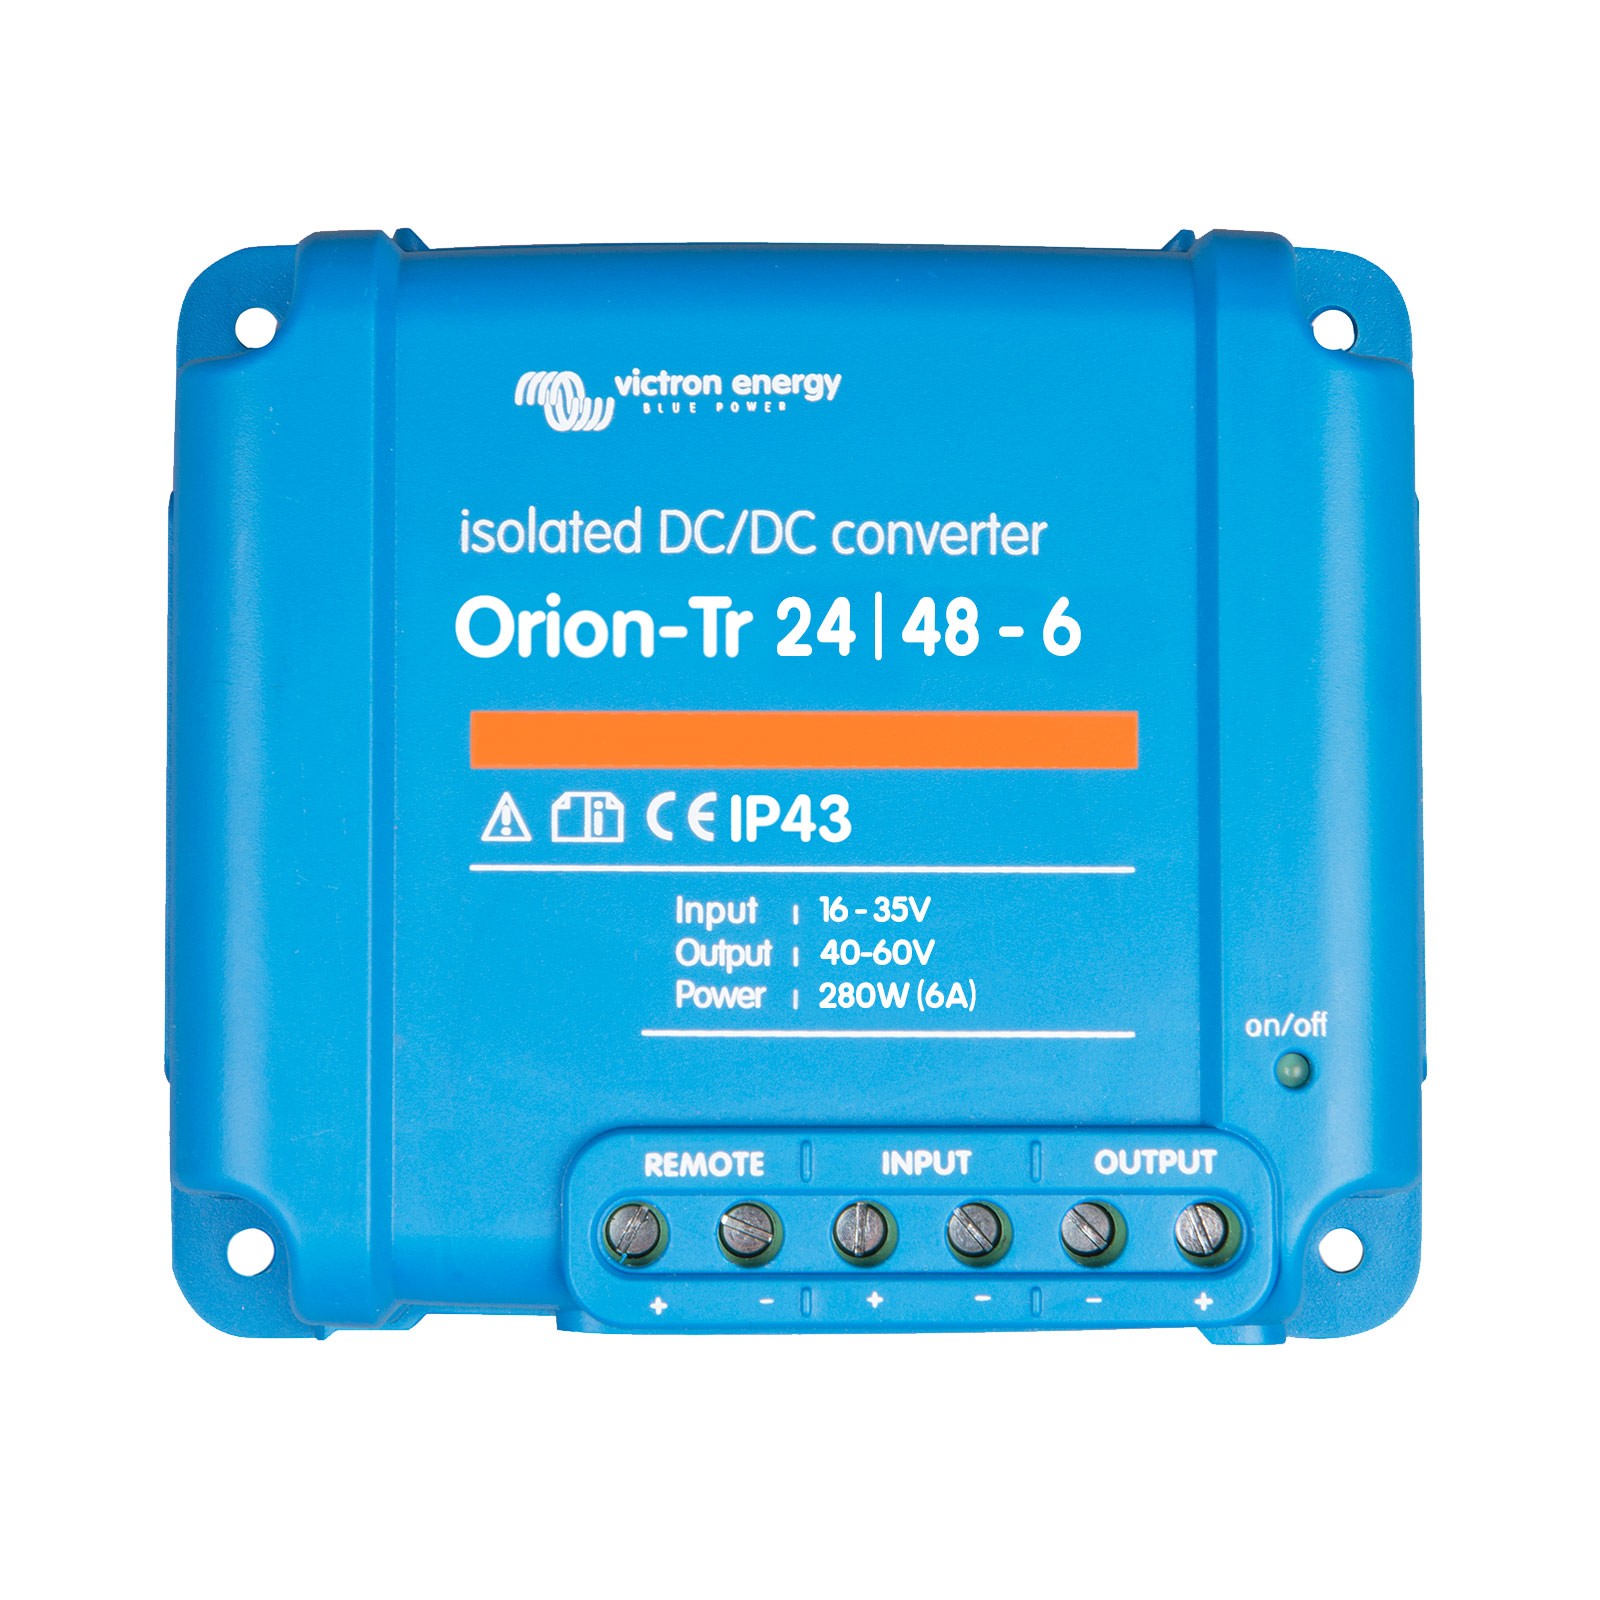 Isolierter Konverter Orion-Tr 24/48-6 A Victron Energy